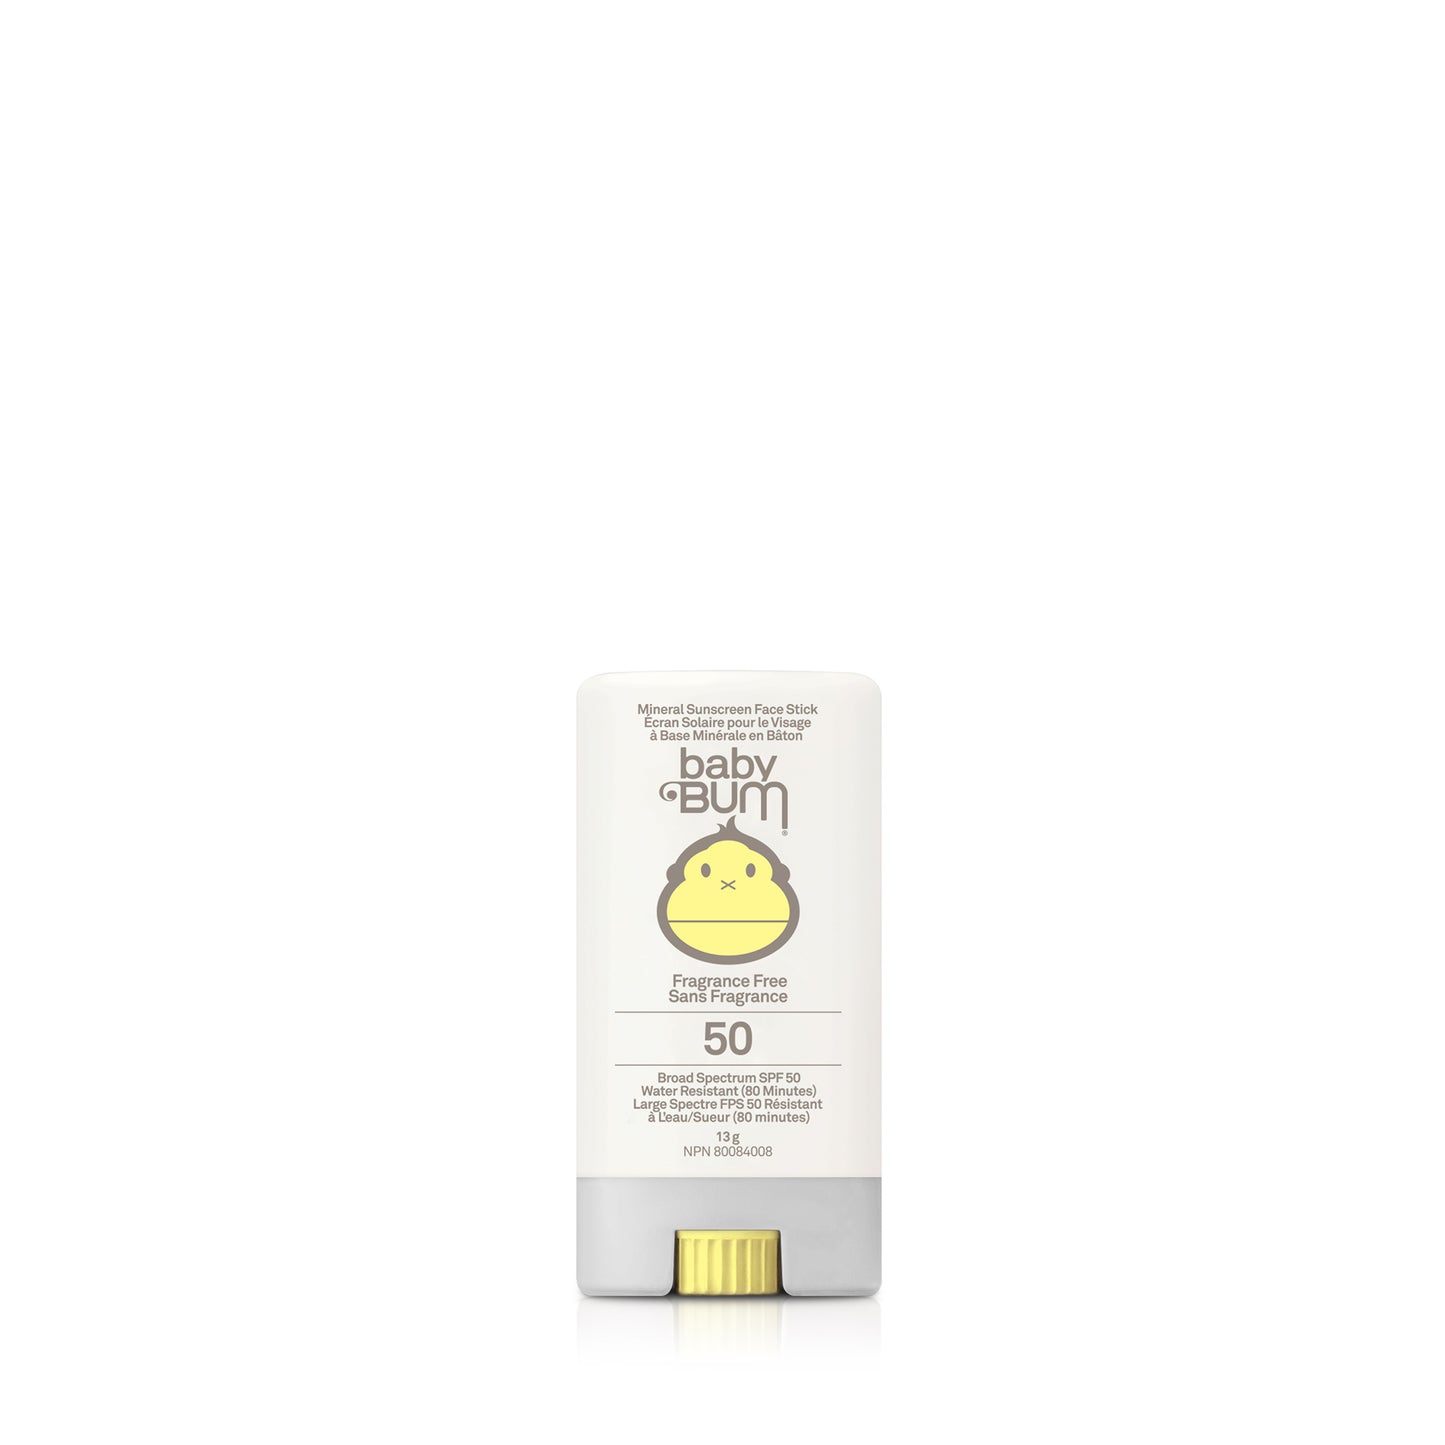 Baby Bum Mineral Face Stick SPF 50